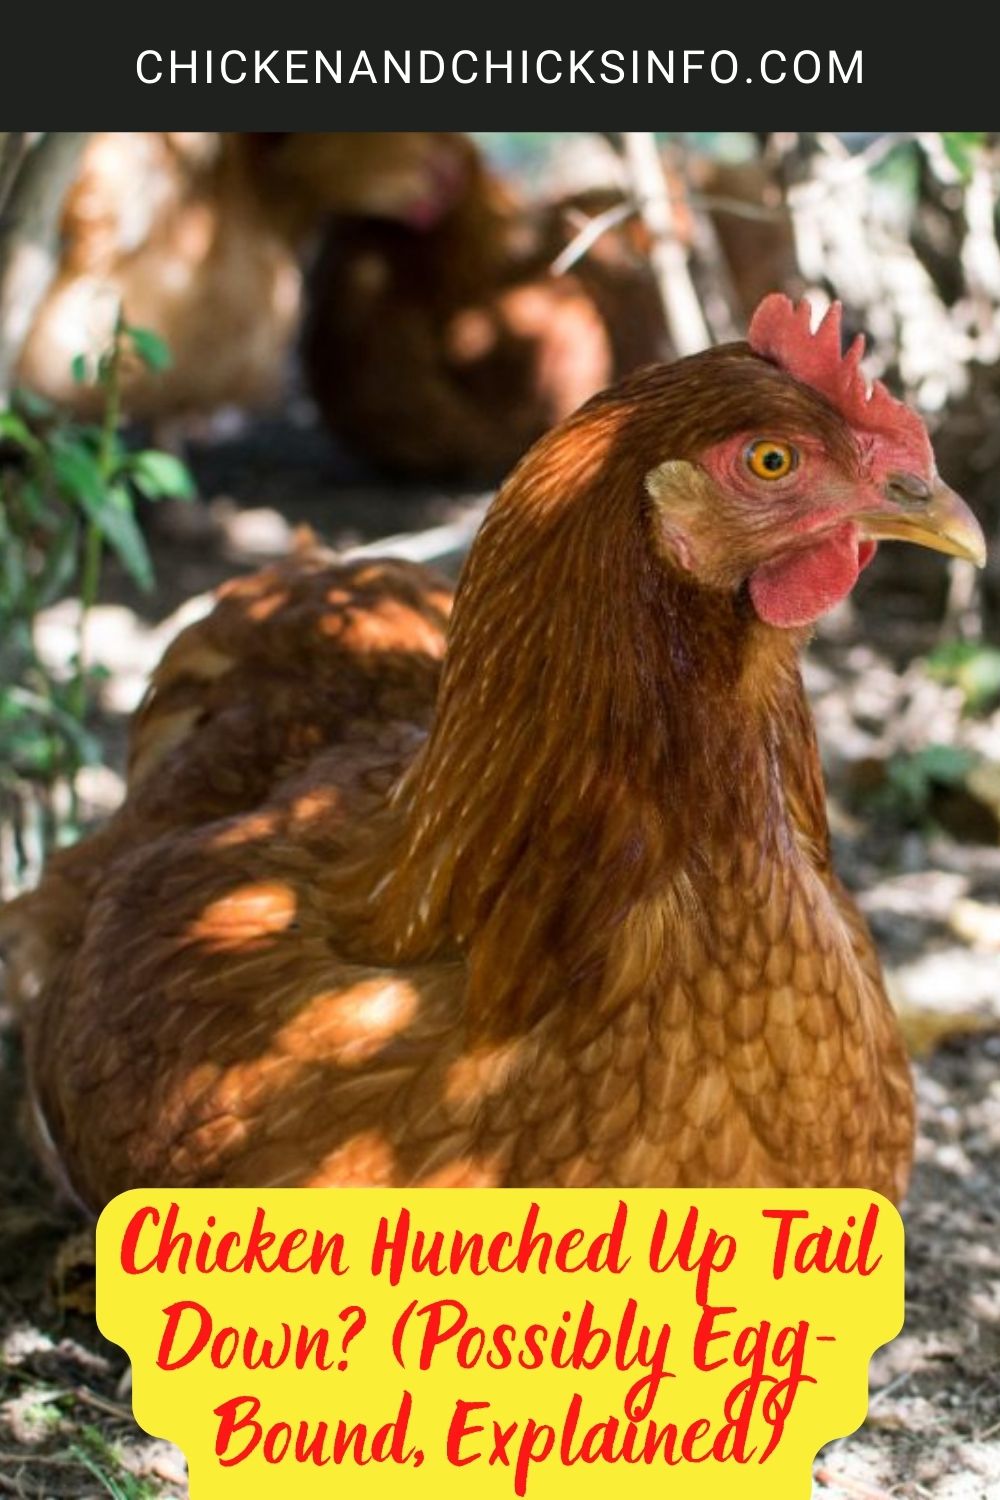 Chicken Hunched Up Tail Down poster.